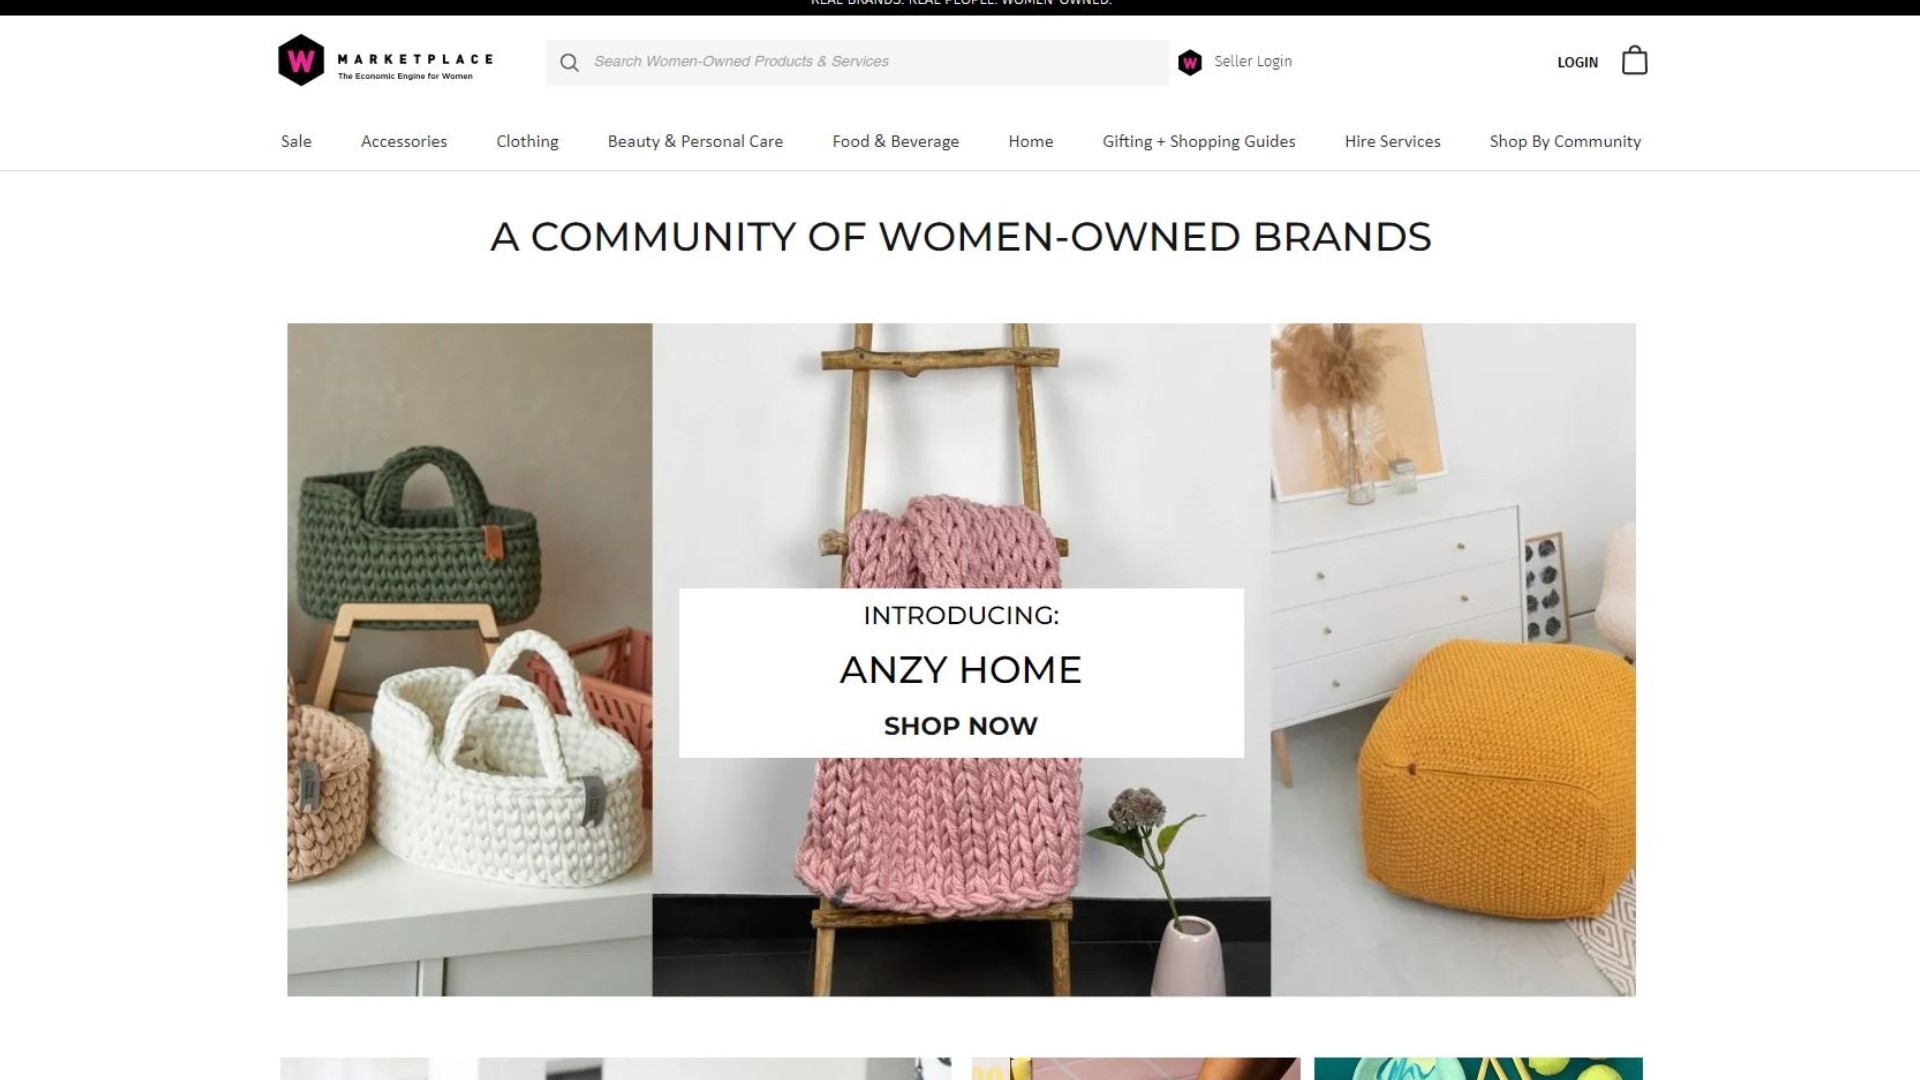 A website devoted to women-owned businesses in the PNW and beyond just launched a sponsorship program to feature Ukrainian women entrepreneurs.